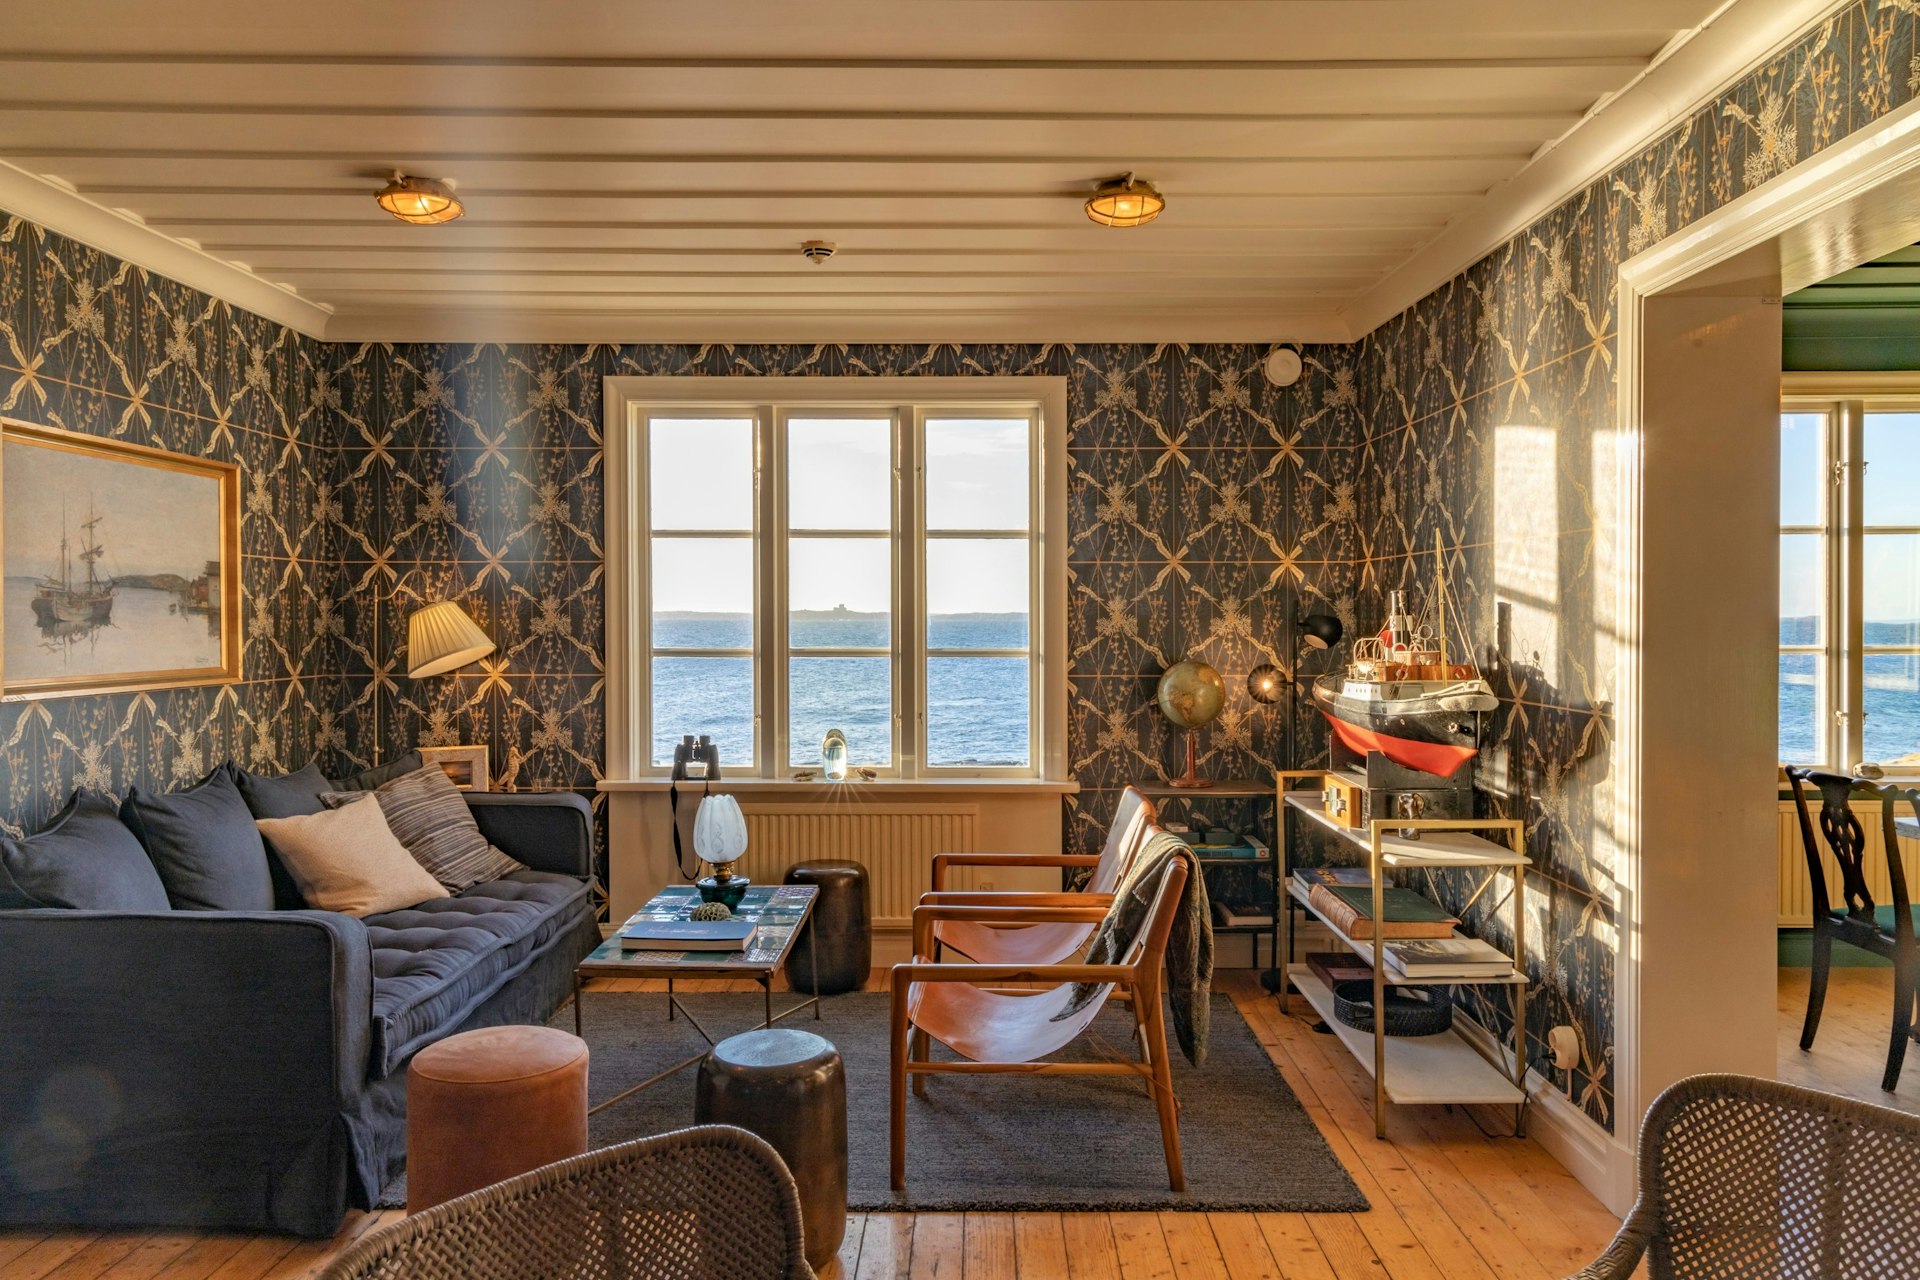 The living room at the Pater Noster hotel in Sweden